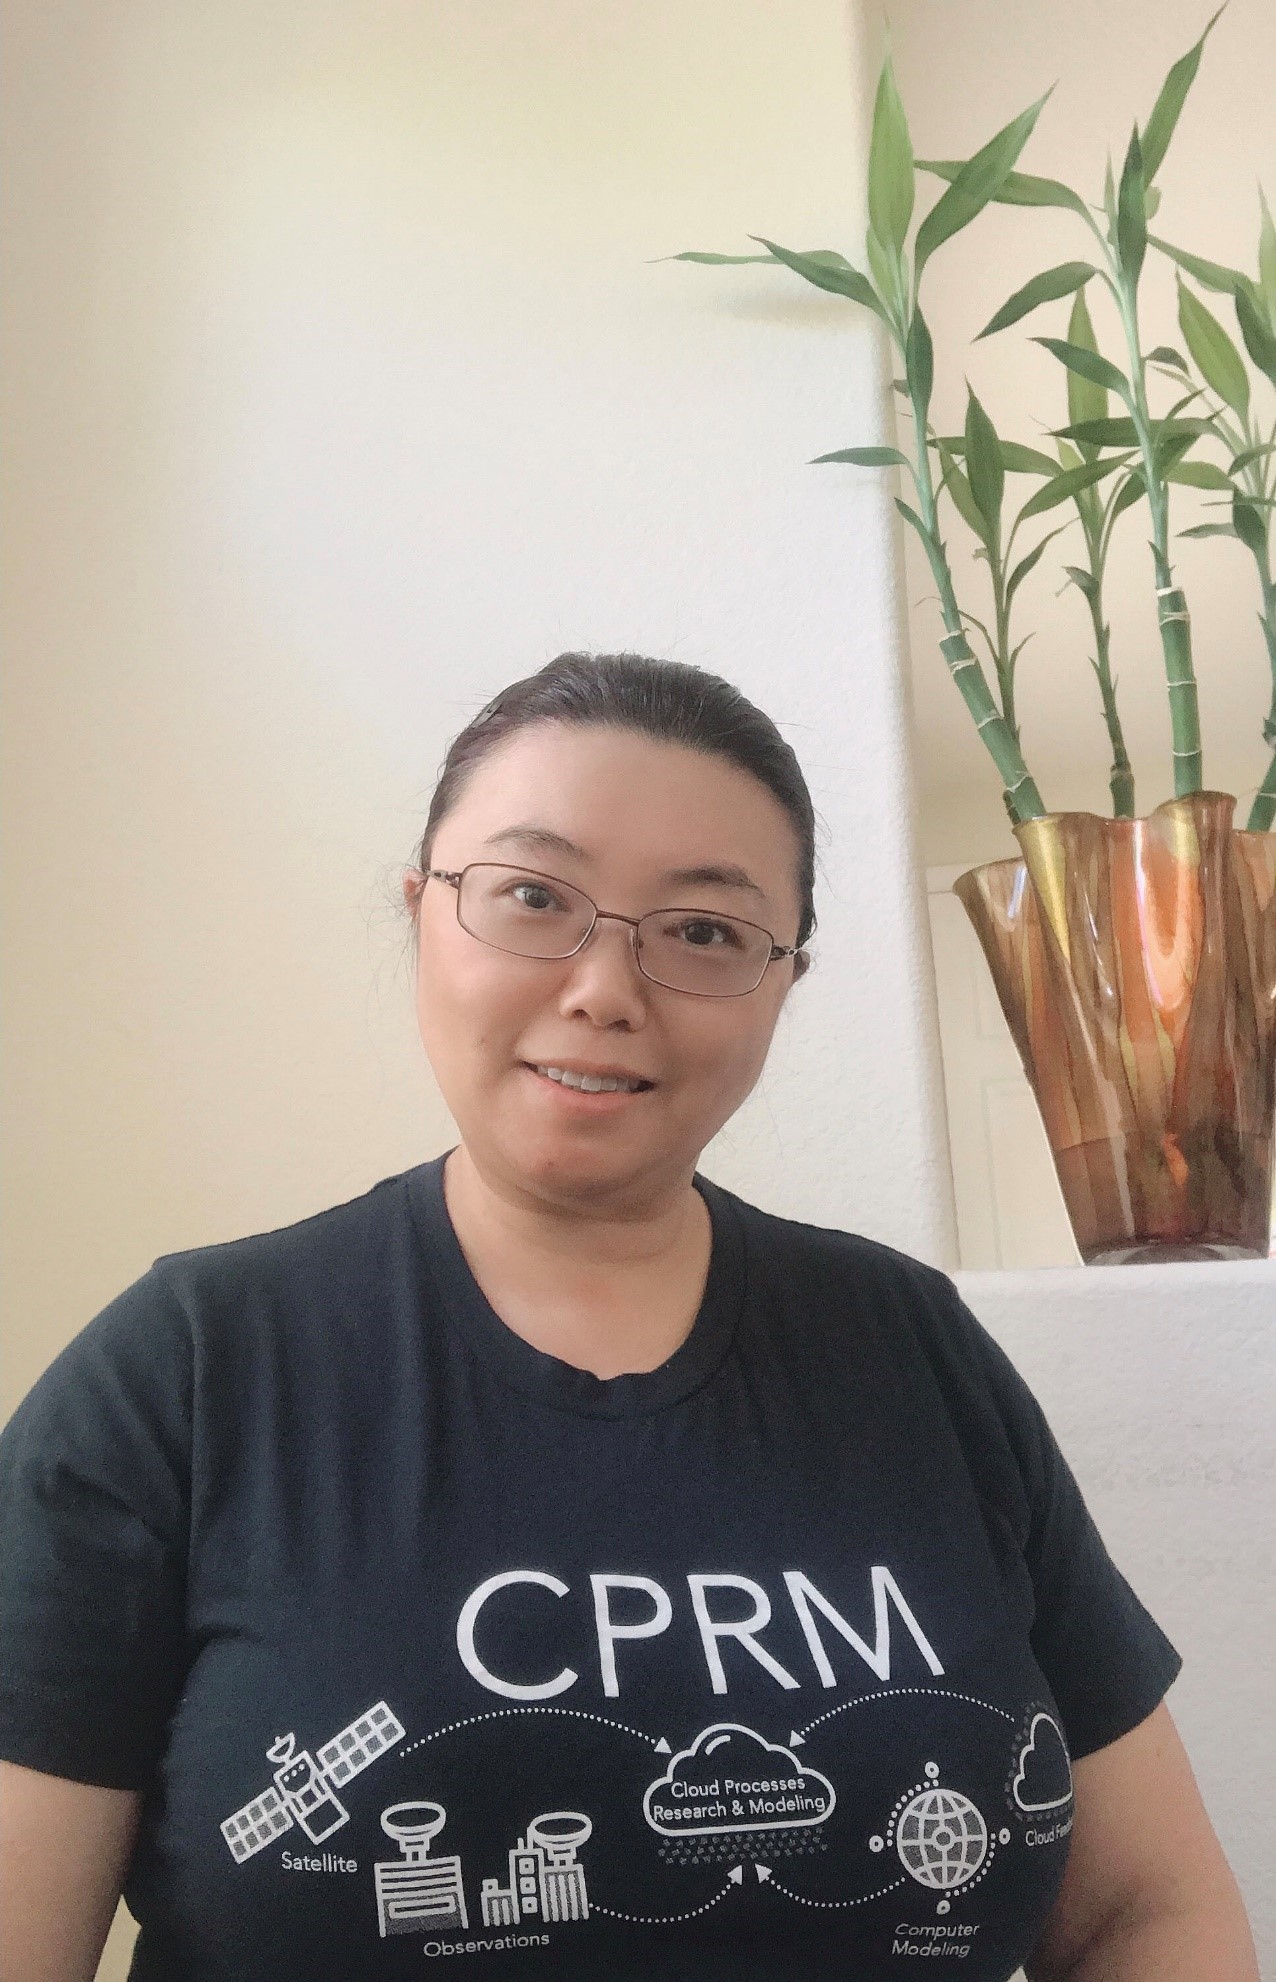 Zhang pauses during work in her home office, modeling a T-shirt made for the Cloud Processes Research and Modeling (CPRM) group at Lawrence Livermore National Laboratory. 